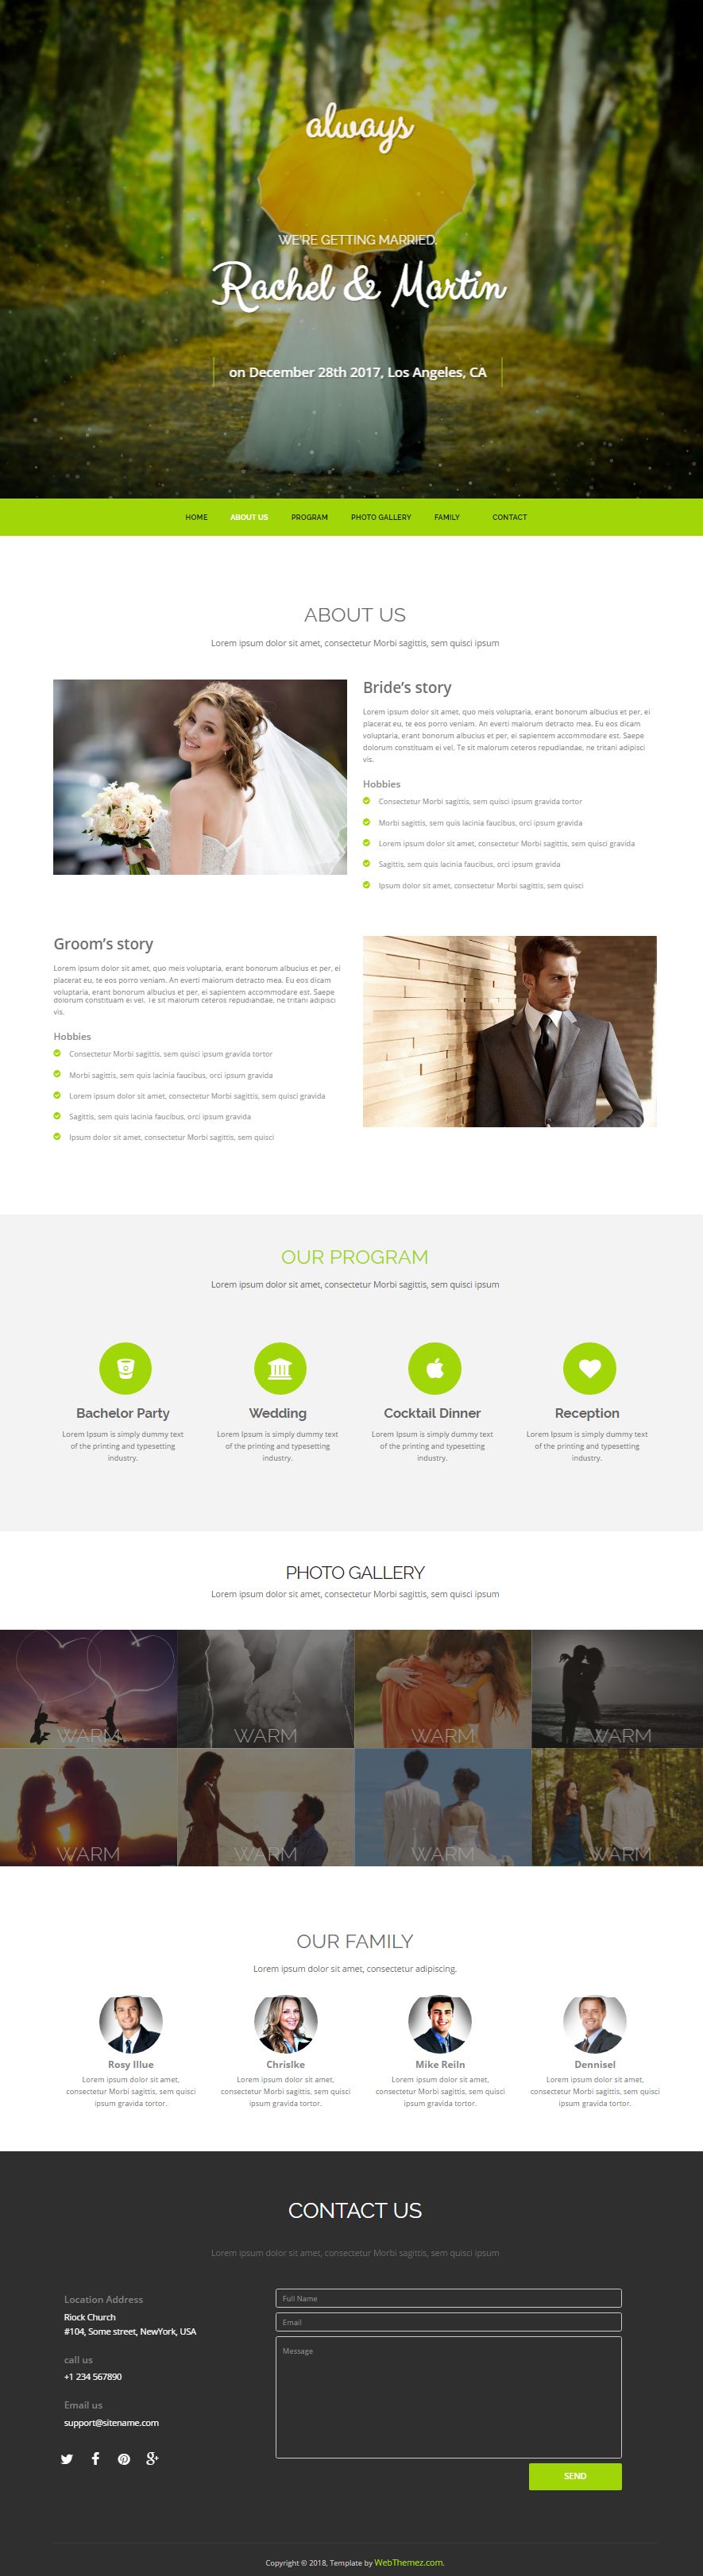 html bootstrap wedding website template free download